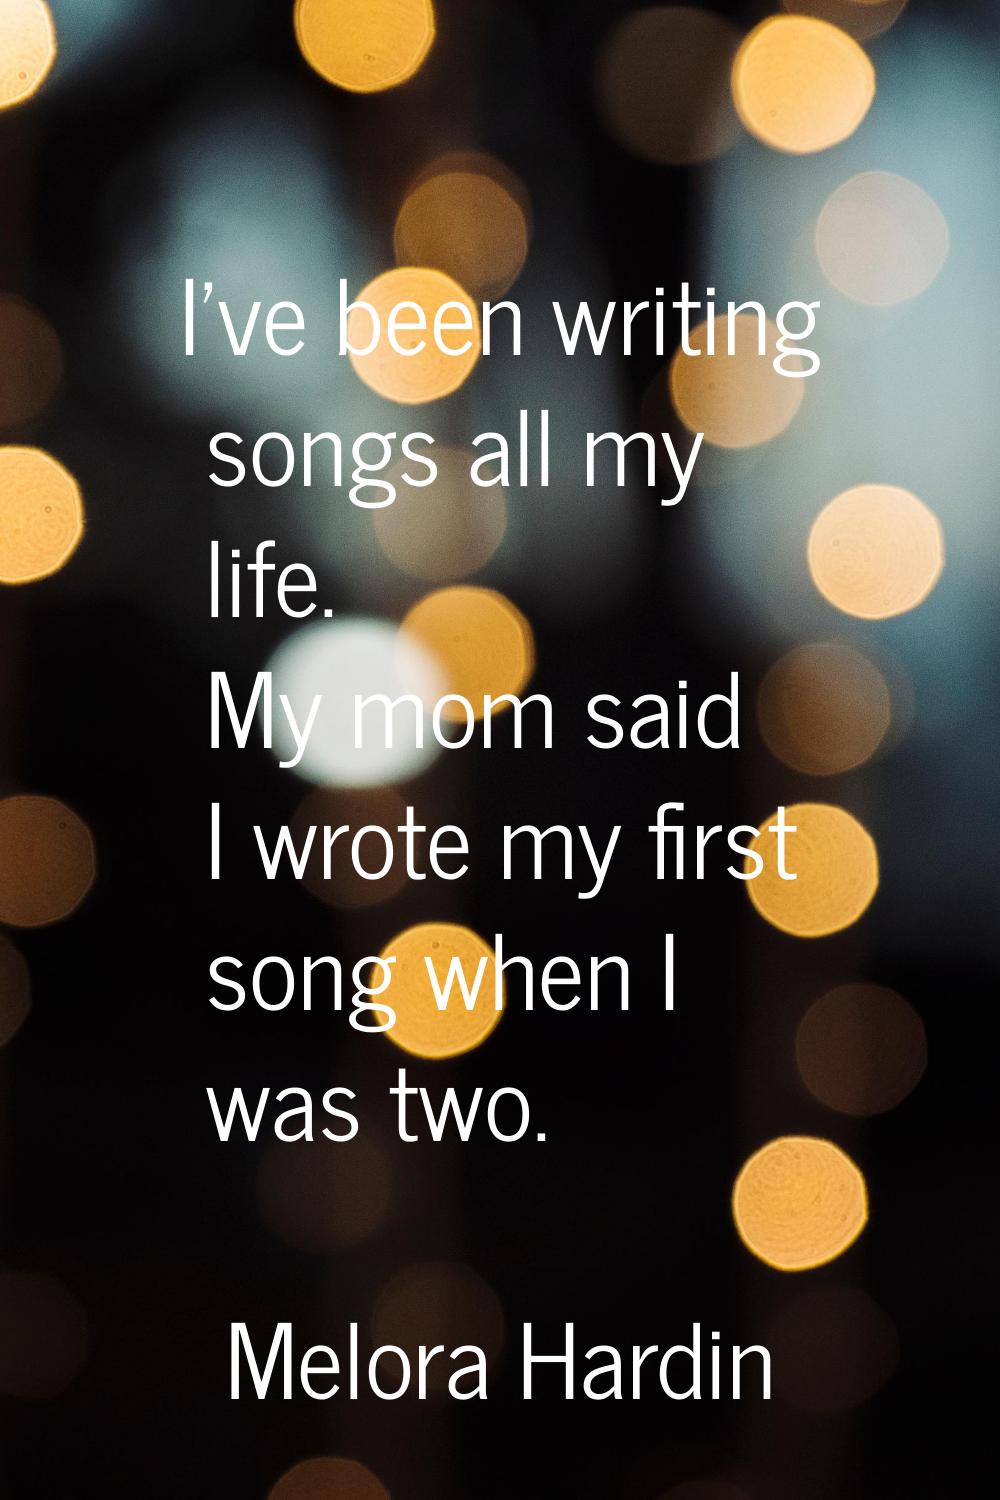 I've been writing songs all my life. My mom said I wrote my first song when I was two.